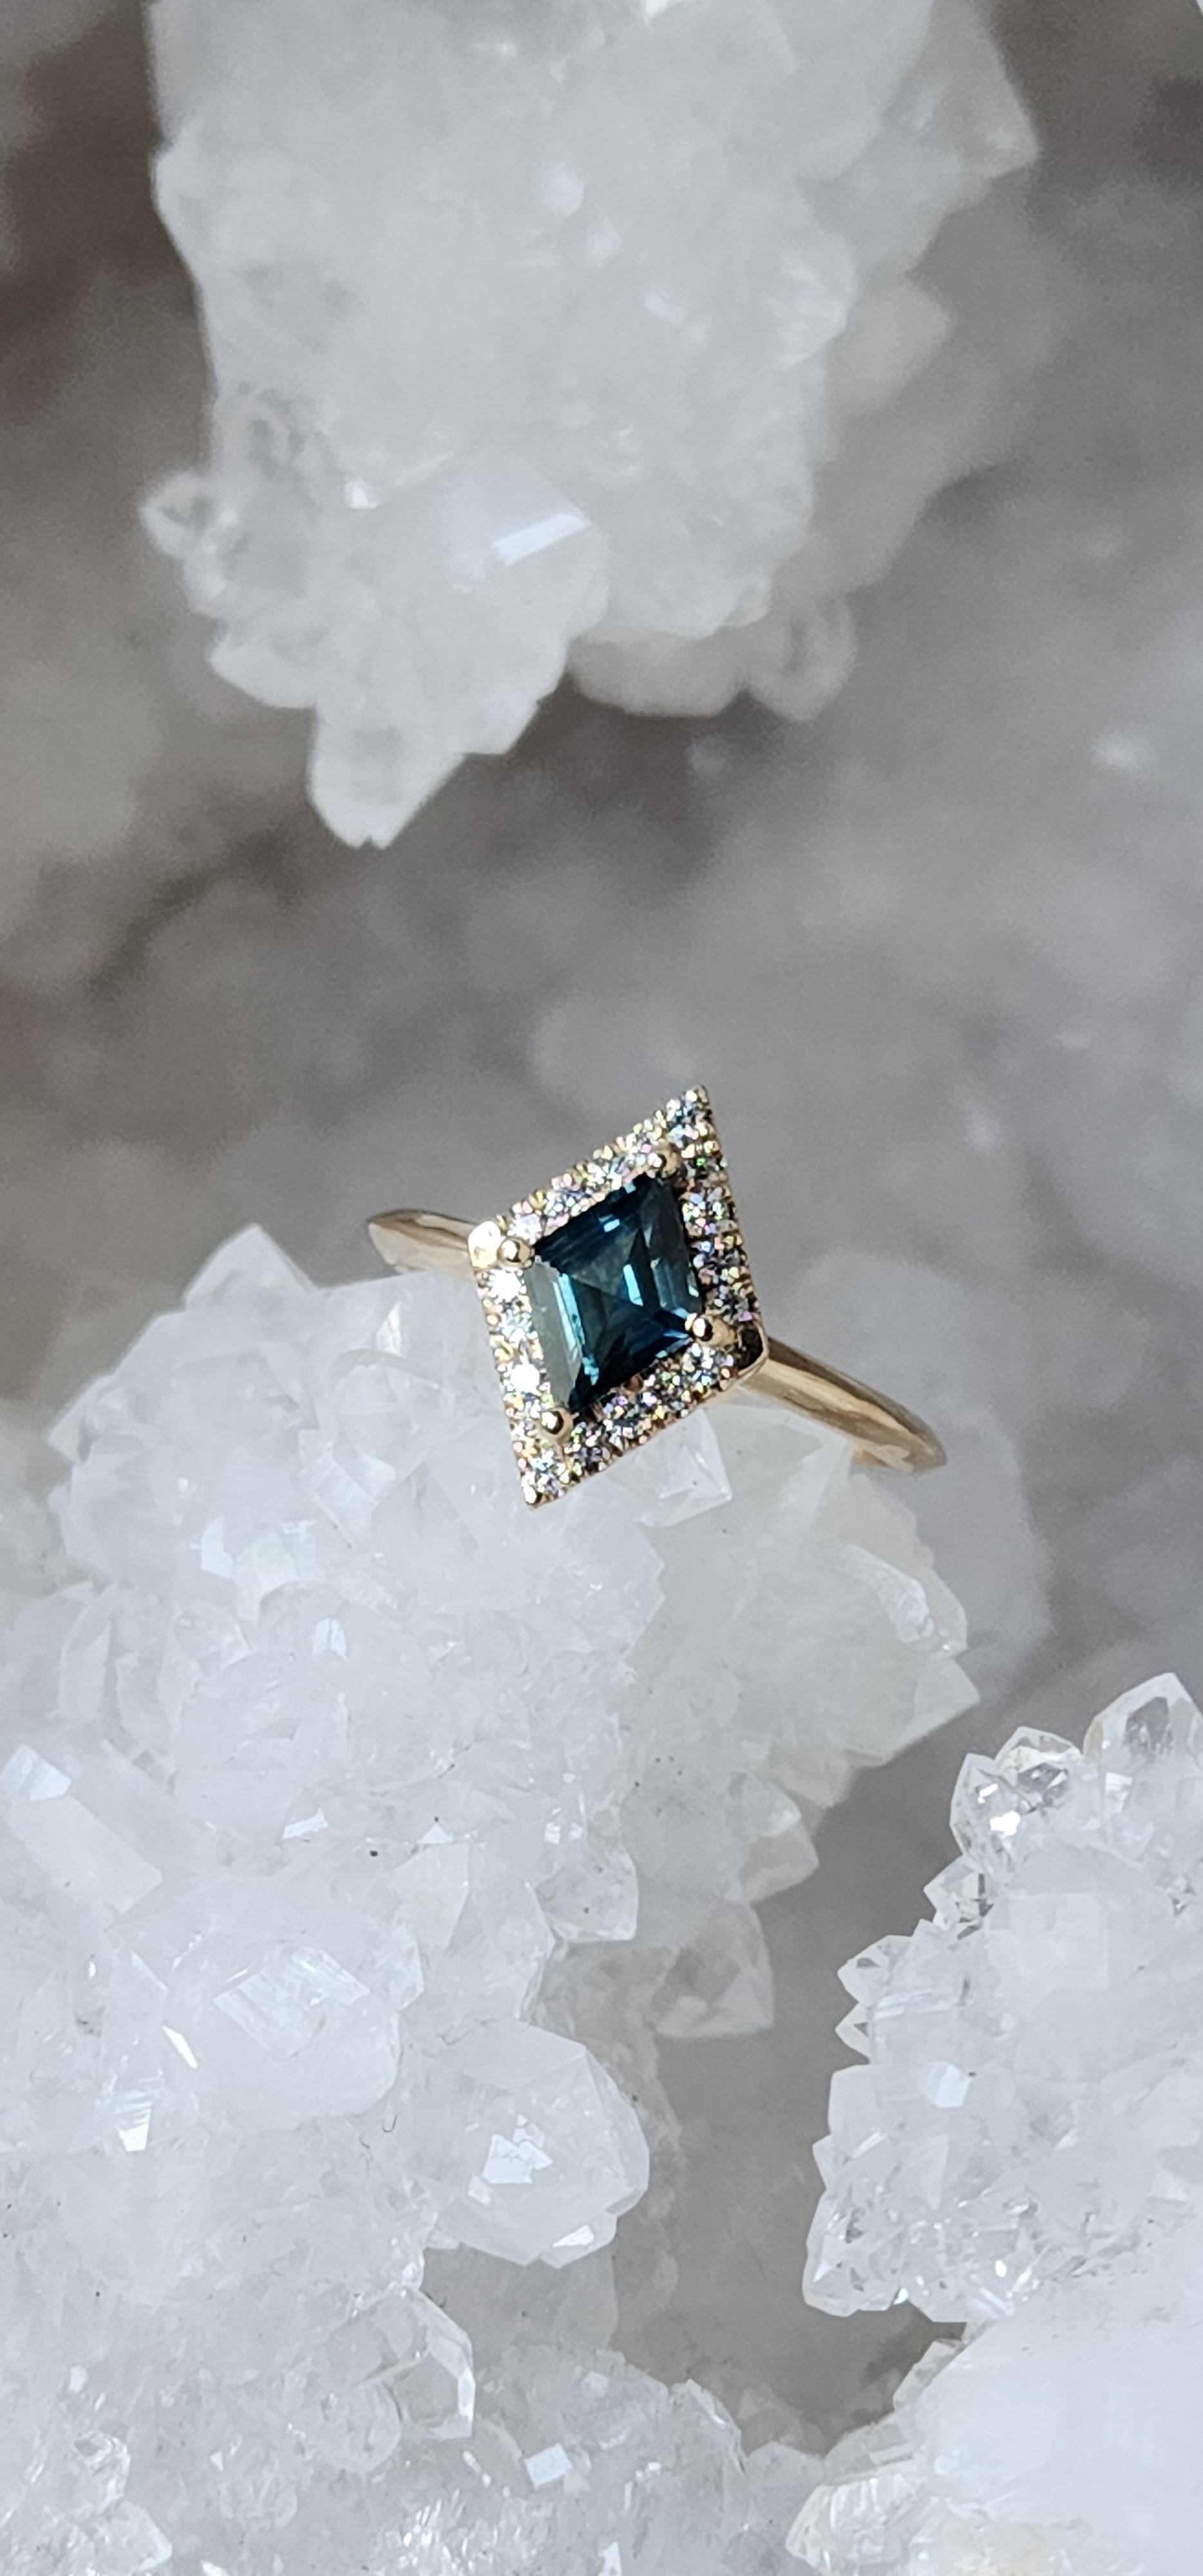 Ring - .95 CT Montana Sapphire Teal Lozenge Cut with Halo Design in 14k Yellow Gold